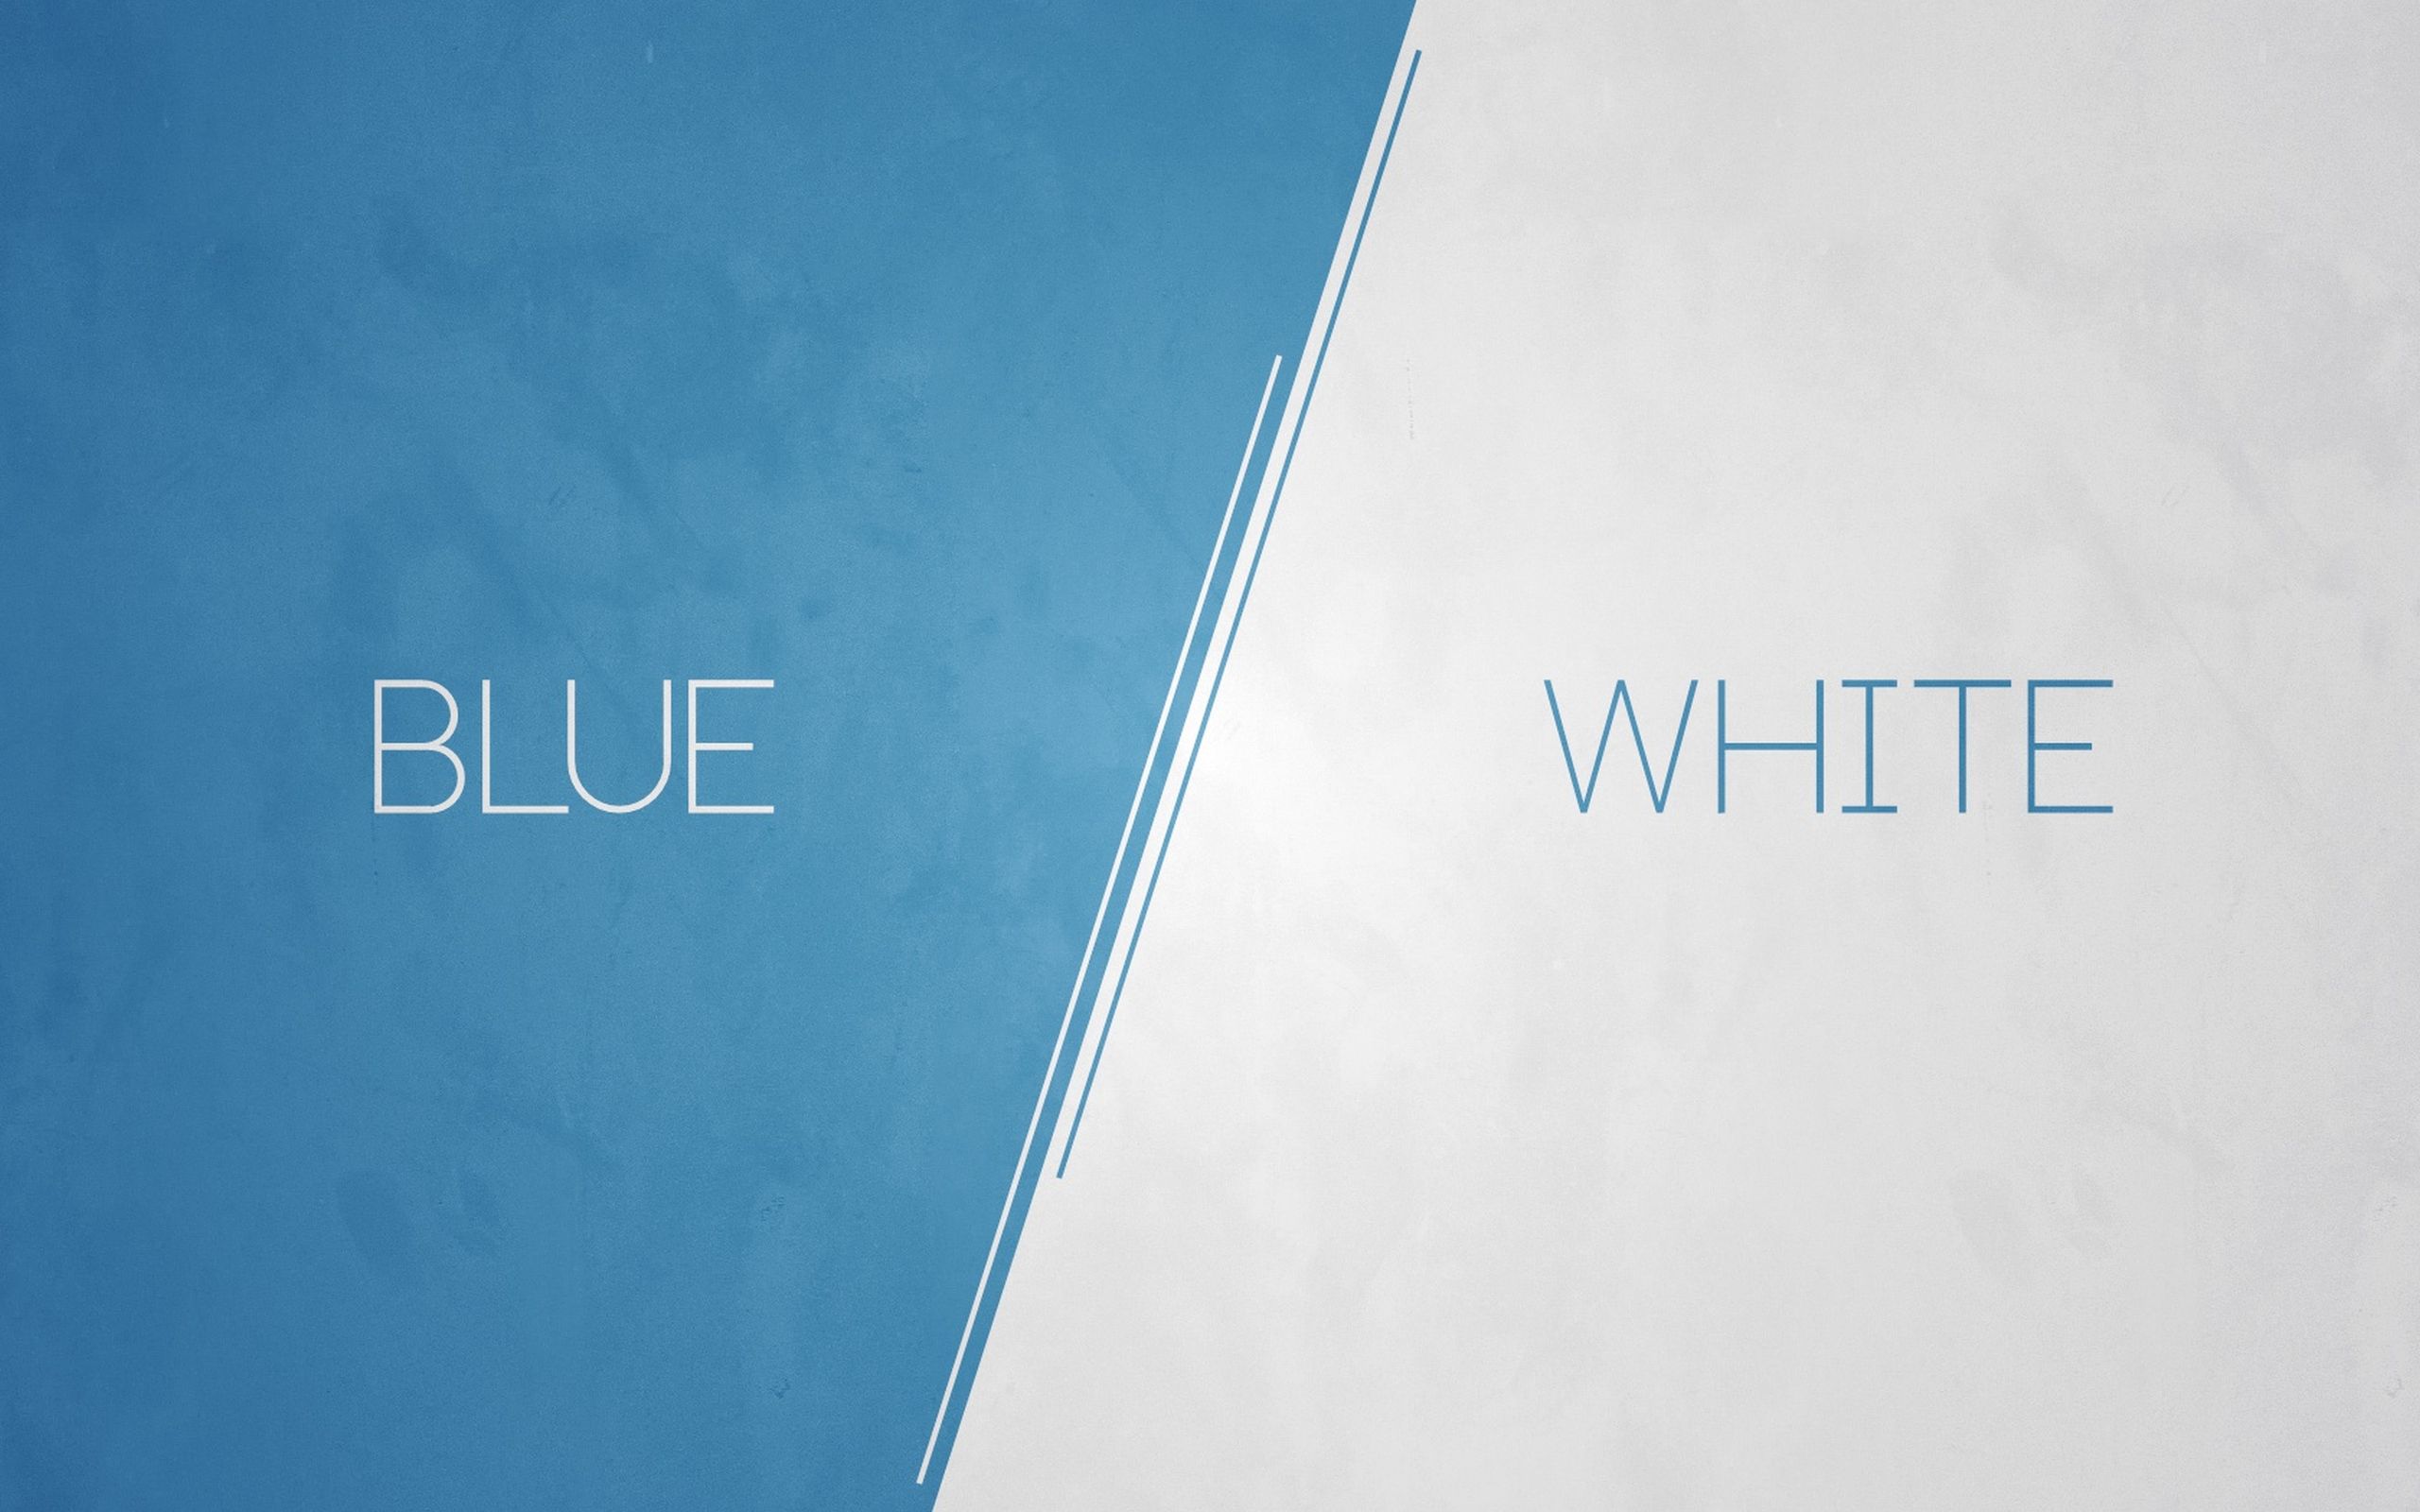 89675 download wallpaper blue, words, white, inscription screensavers and pictures for free